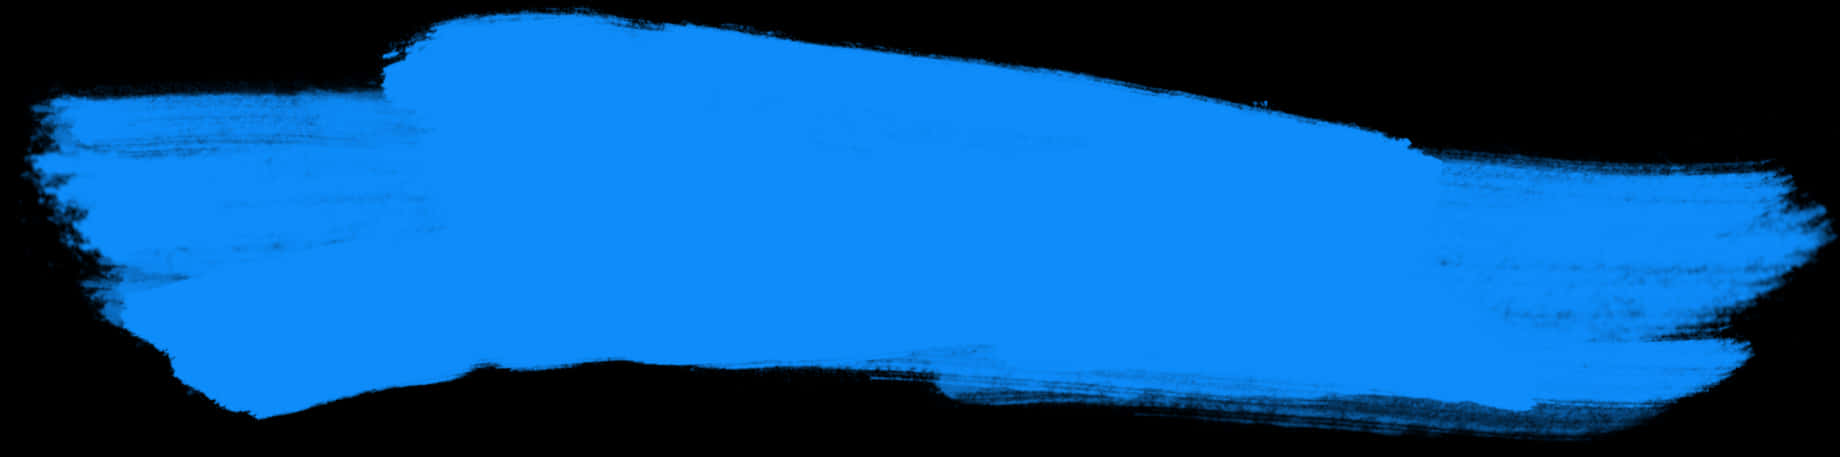 Blue Brush Stroke Texture PNG